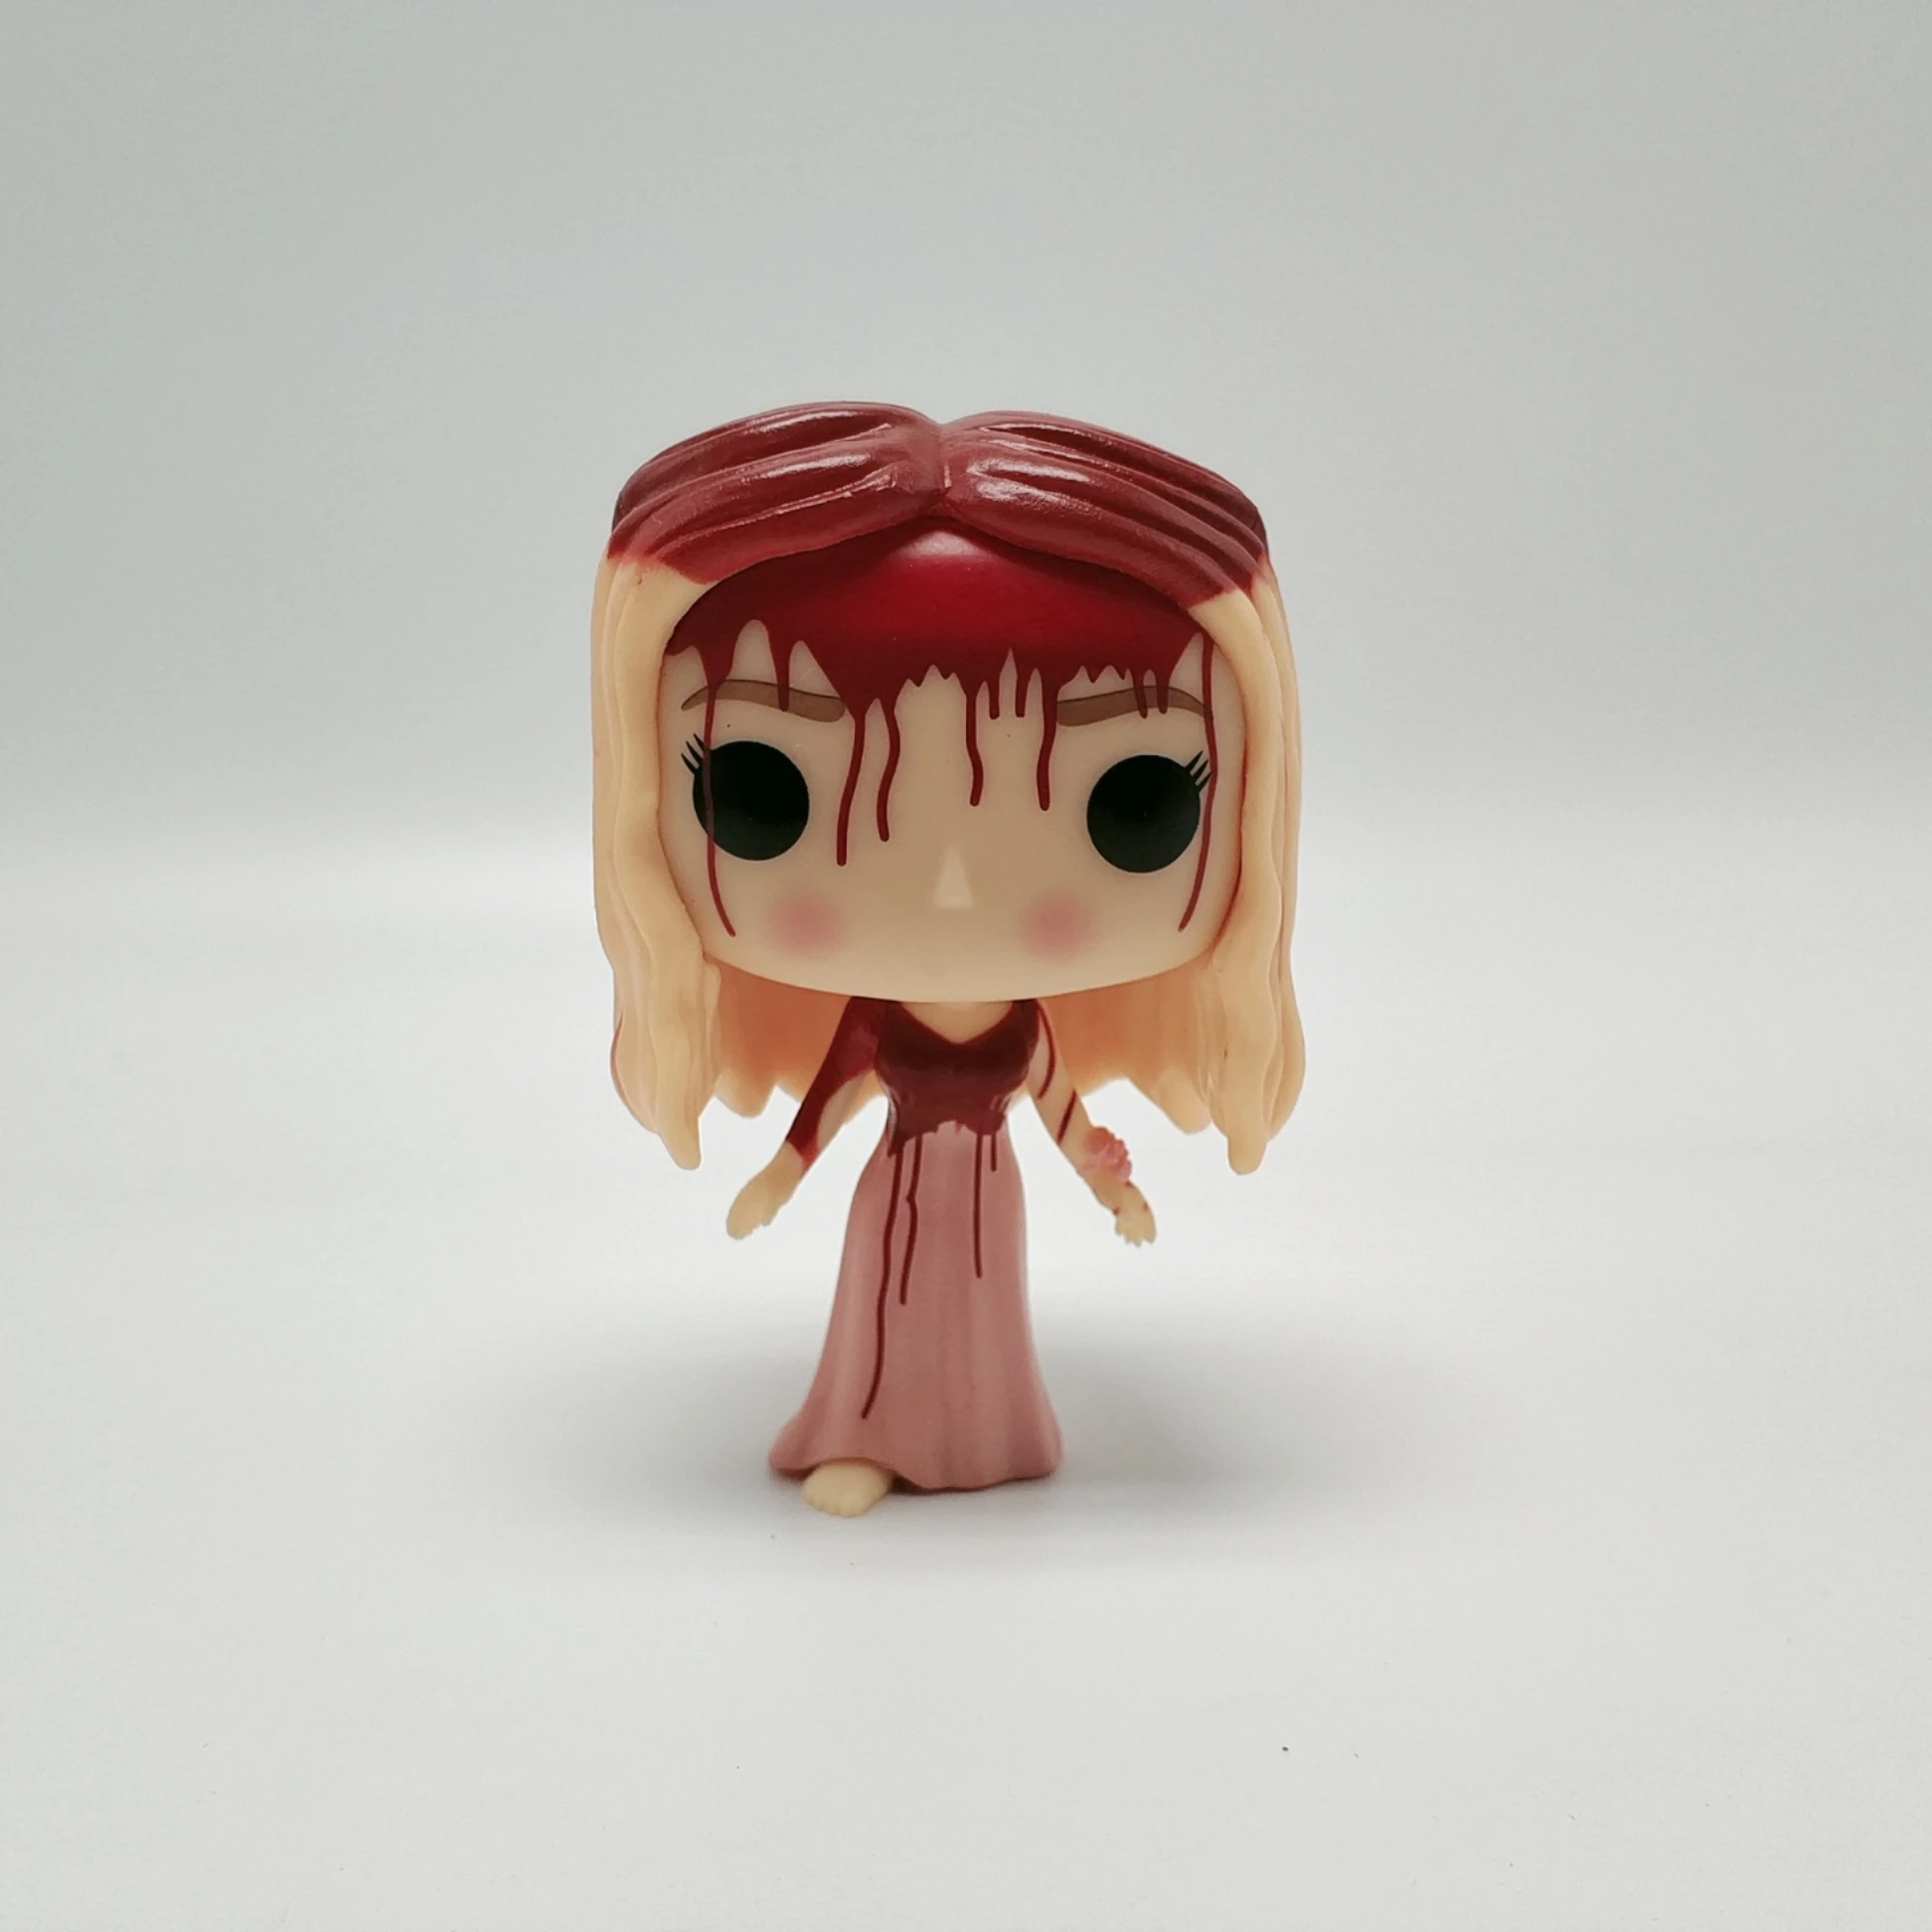 modvirke Uberettiget sikkert Funko Pop Movie Carrie 467# Action Figure Toys Witch Bloody Collection  Model Vinyl Figure Doll Gift Wholesale - Buy Funko Pop Carrie,Carrie Action  Figure Toys,Carrie Model Doll Product on Alibaba.com